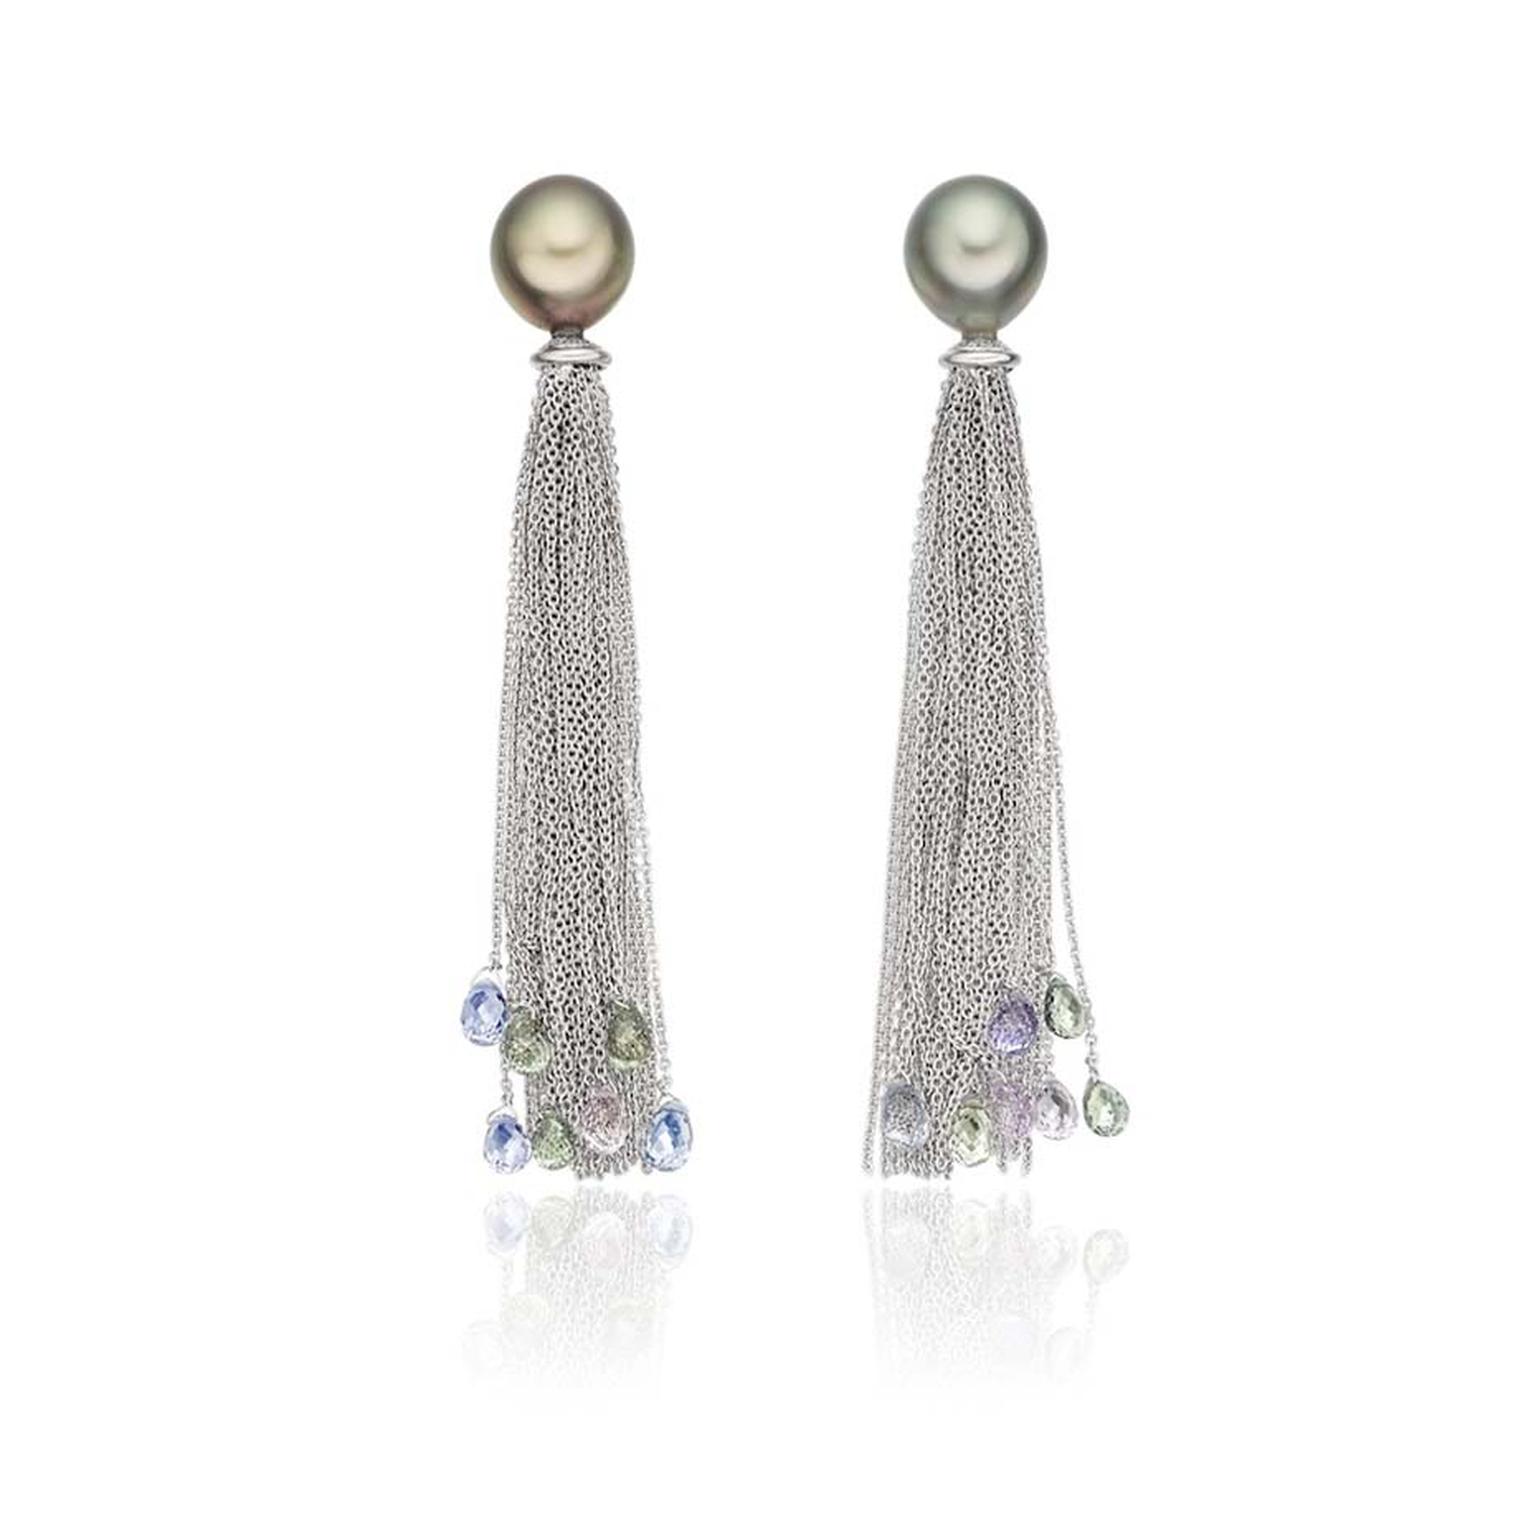 Lily Hastedt white gold Tassle earrings with Tahitian pearls and sapphire briolettes (£3,950)